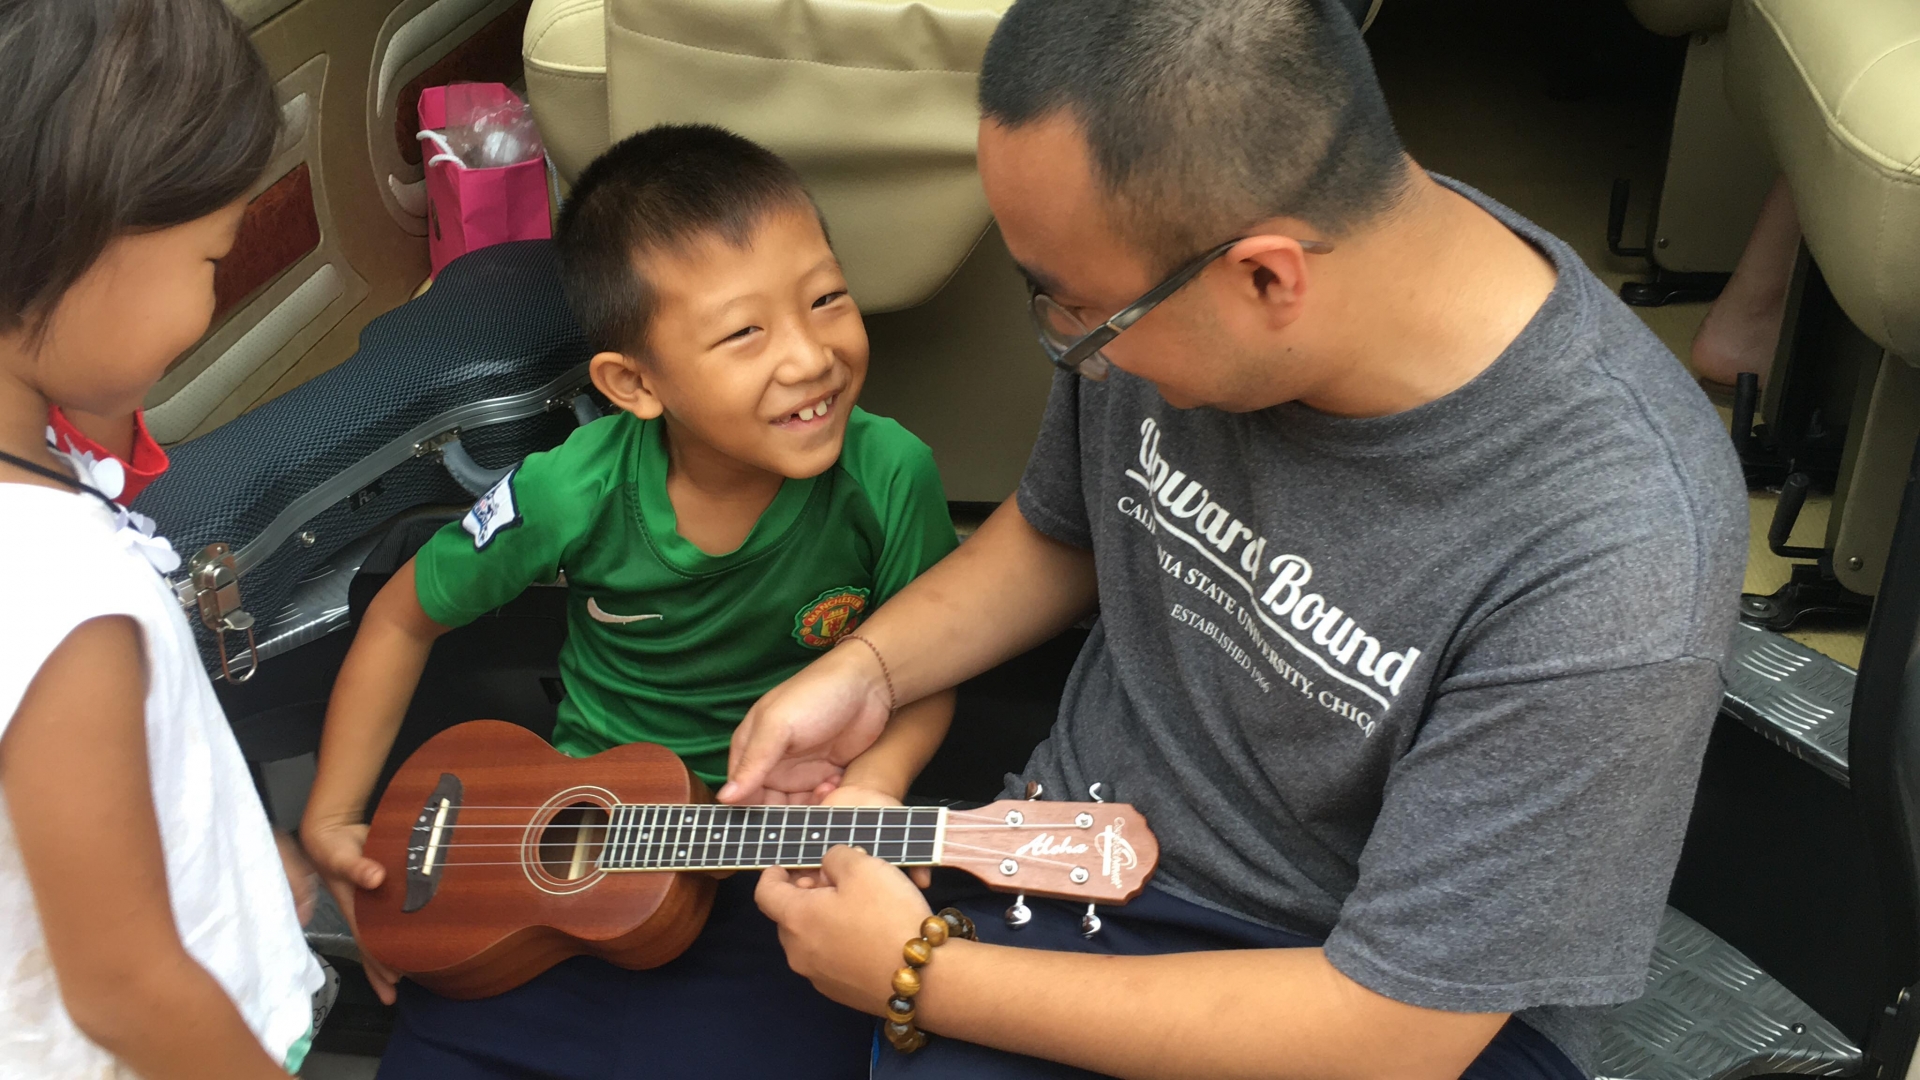 Pengcheng plays a small string instrument with a young boy.